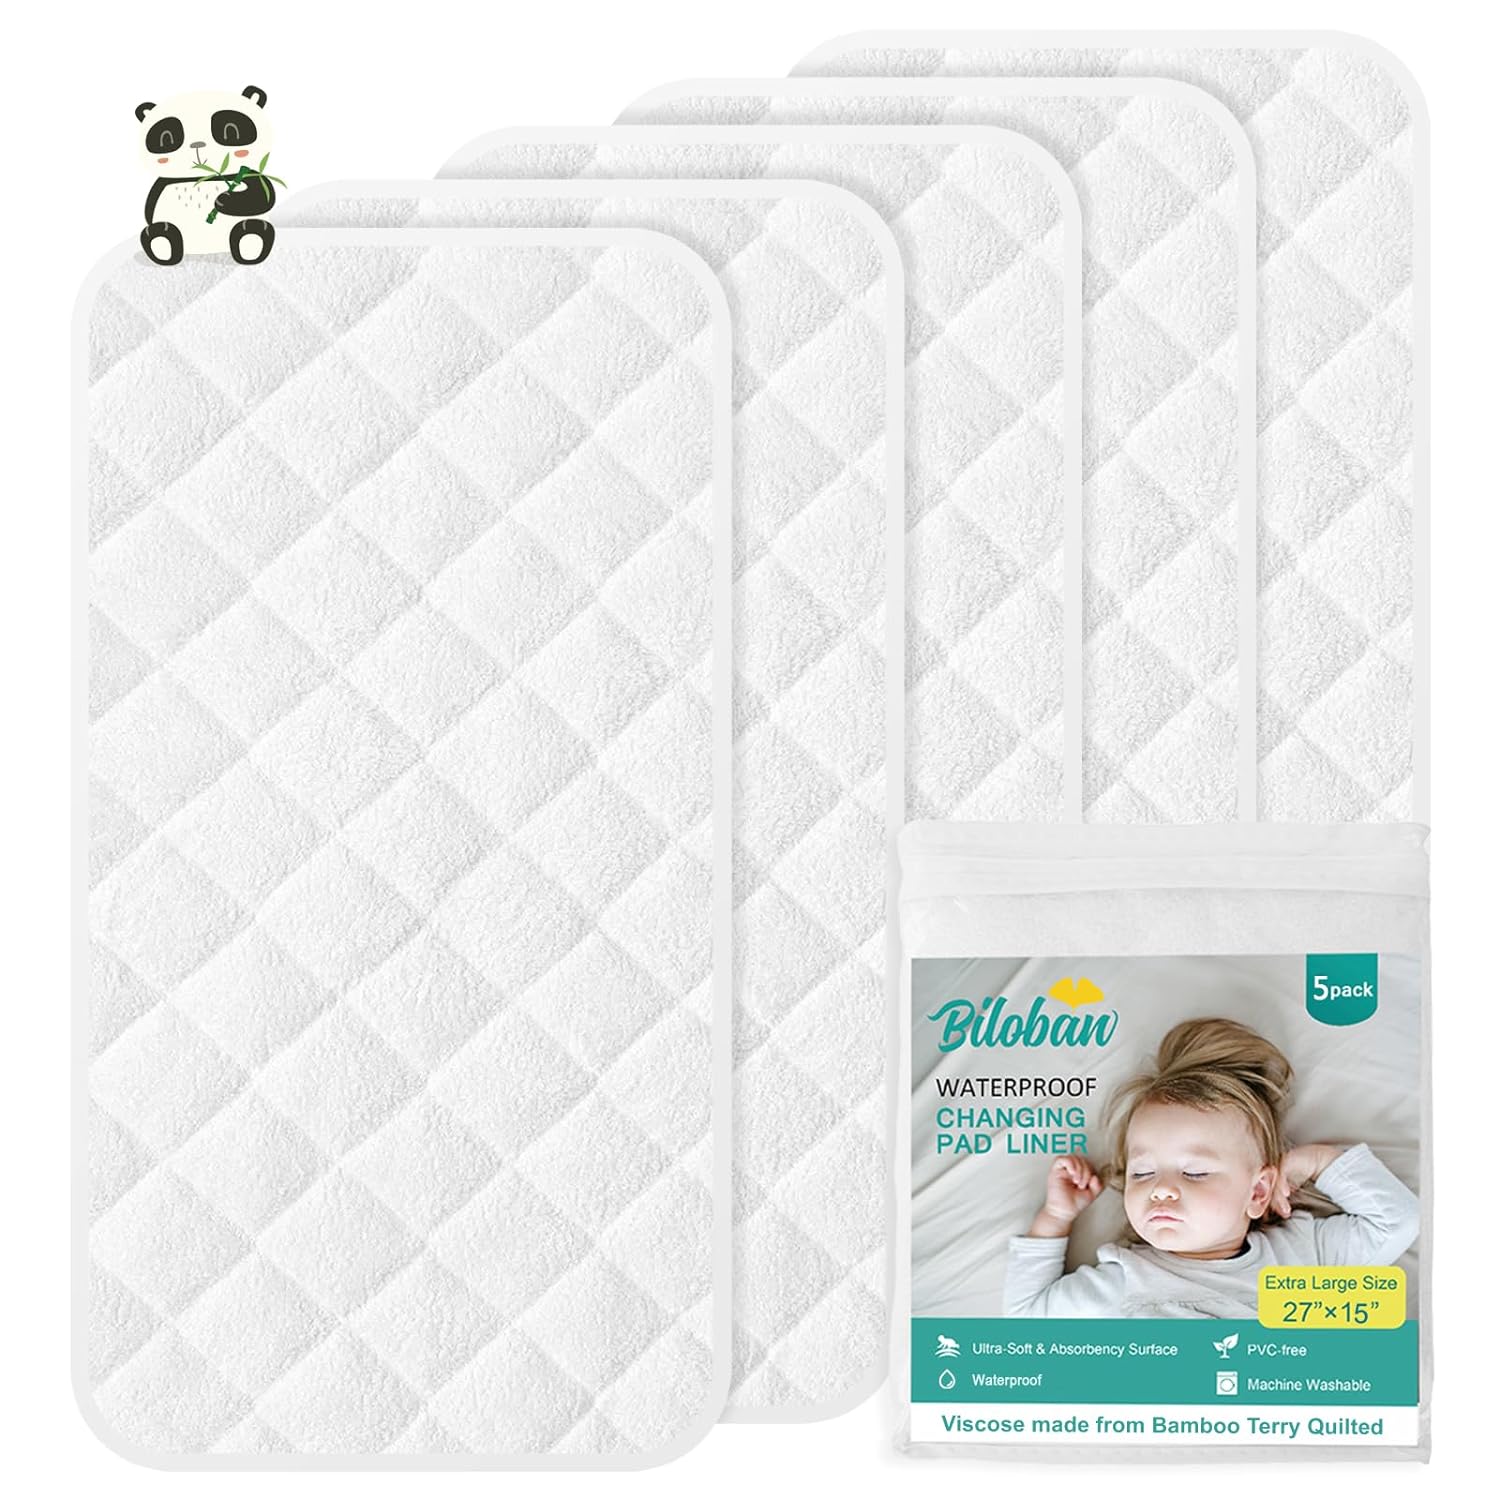 Changing Pad Liners - 5 pack, Bamboo Terry Surface, Waterproof & Absorbent, Diaper Mat - Biloban Online Store